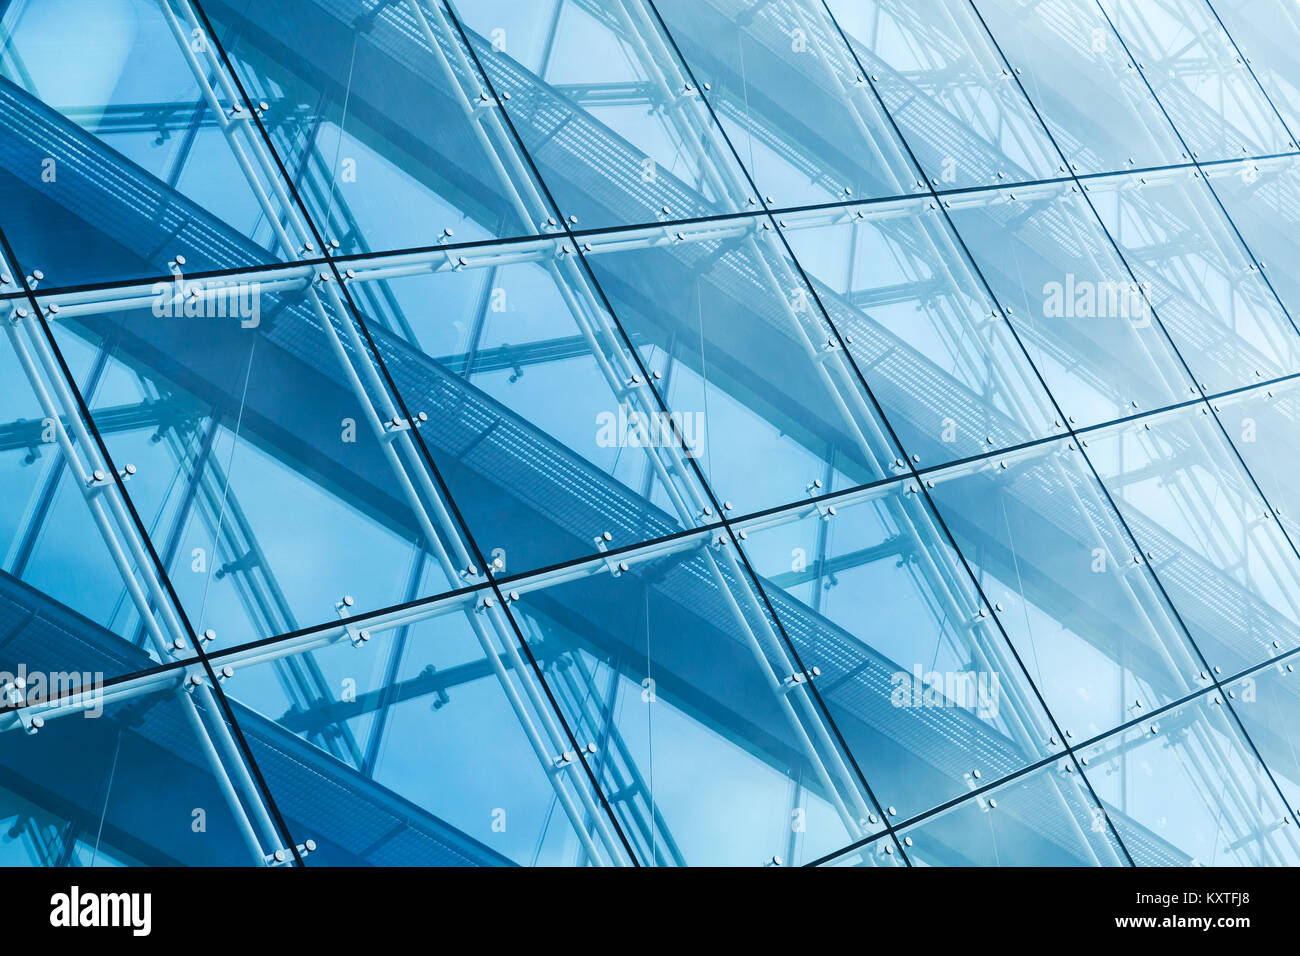 Modern architecture, curtain wall made of blue toned glass and steel constructions Stock Photo